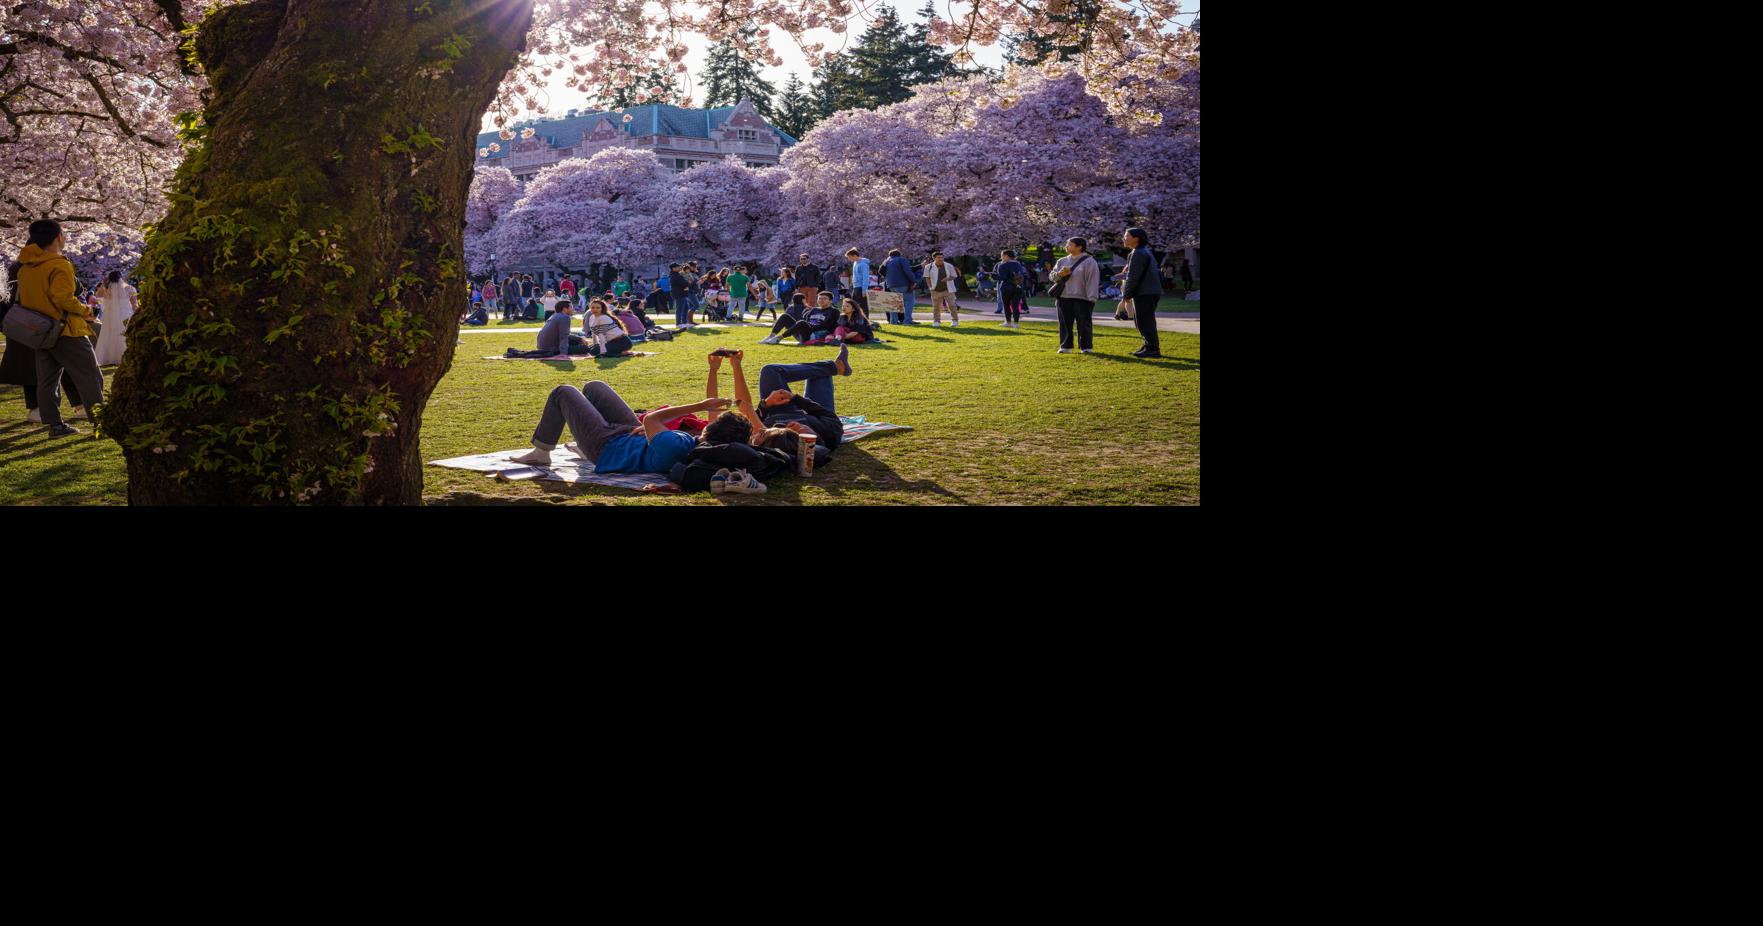 UW welcomes back cherry blossom admirers just in time for spring's